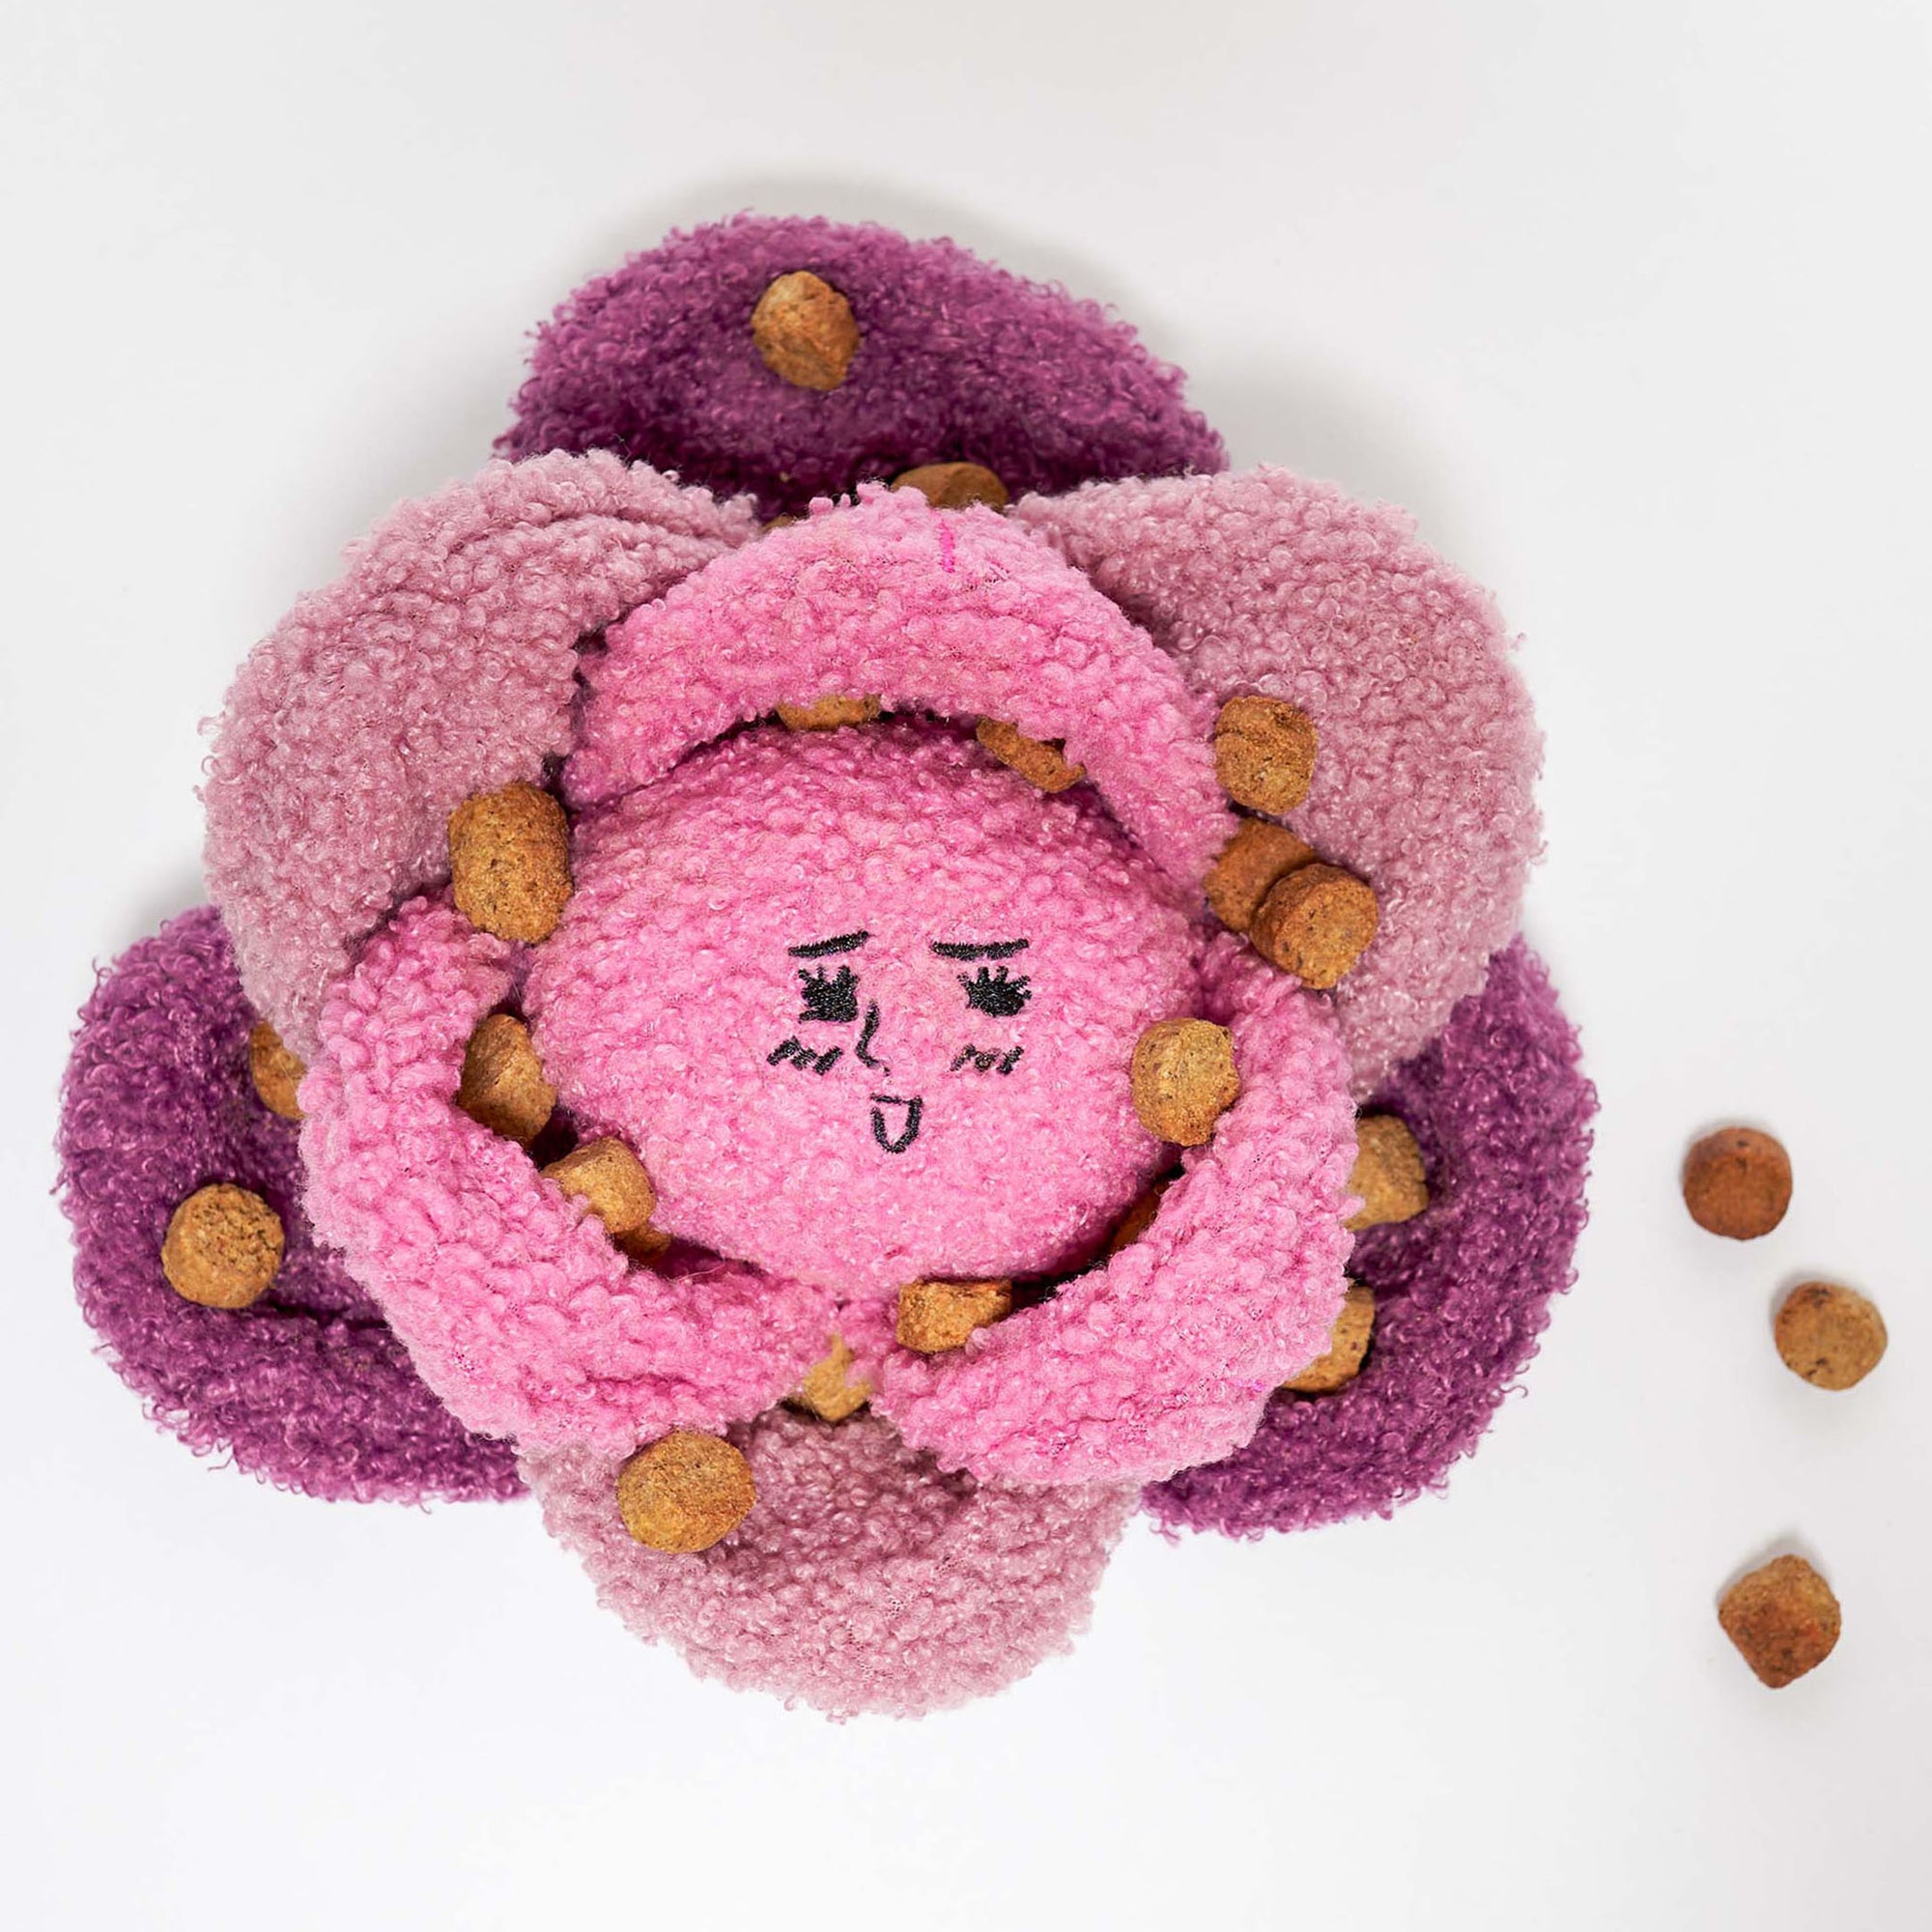 The image shows a dog nosework toy resembling a red cabbage, with multiple fabric layers in pink and purple, and brown elements mimicking seeds. The smiling face at the center adds charm. This interactive toy stimulates a dog's sense of smell, with pockets for hiding treats. The plain background highlights the toy's design.